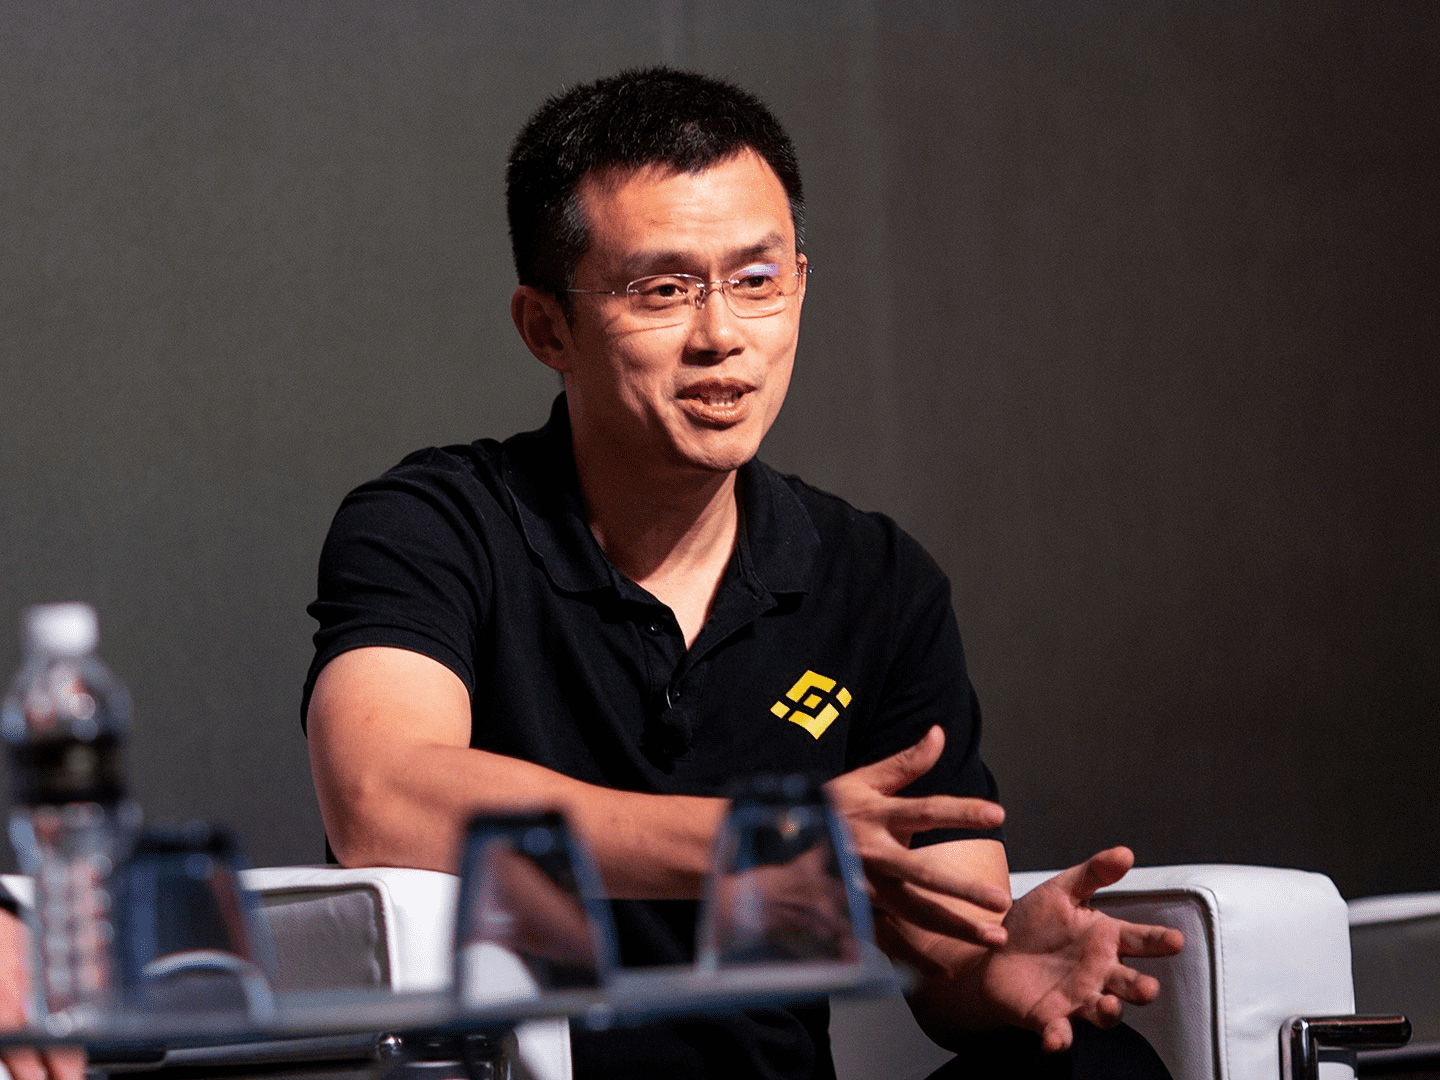 Chanpeng Zhao is one of the individuals who defined the Global Tech Space in 2022